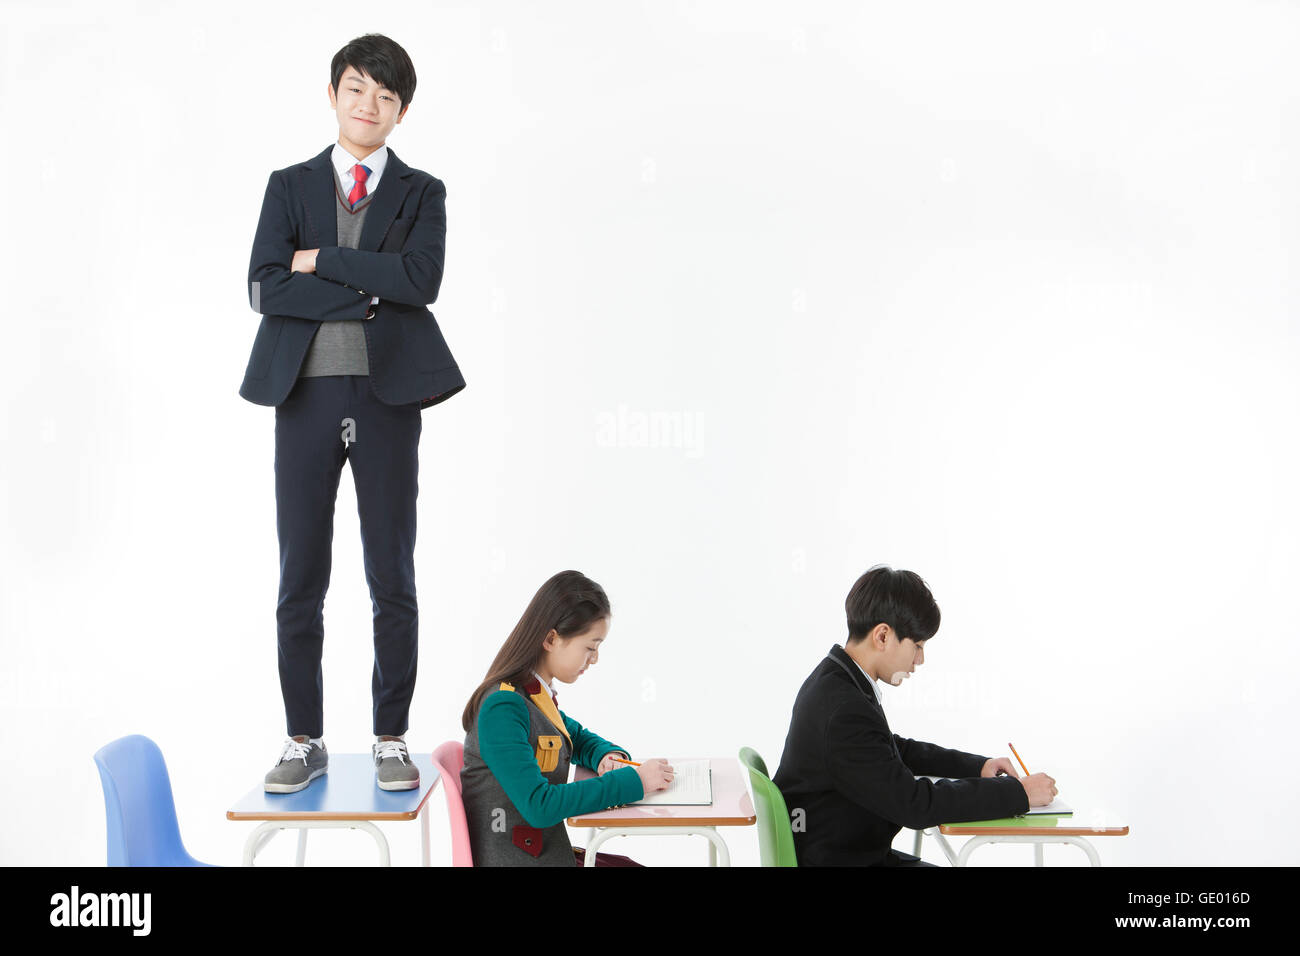 One middle school boy standing on desk with his arms folded and two students studying Stock Photo